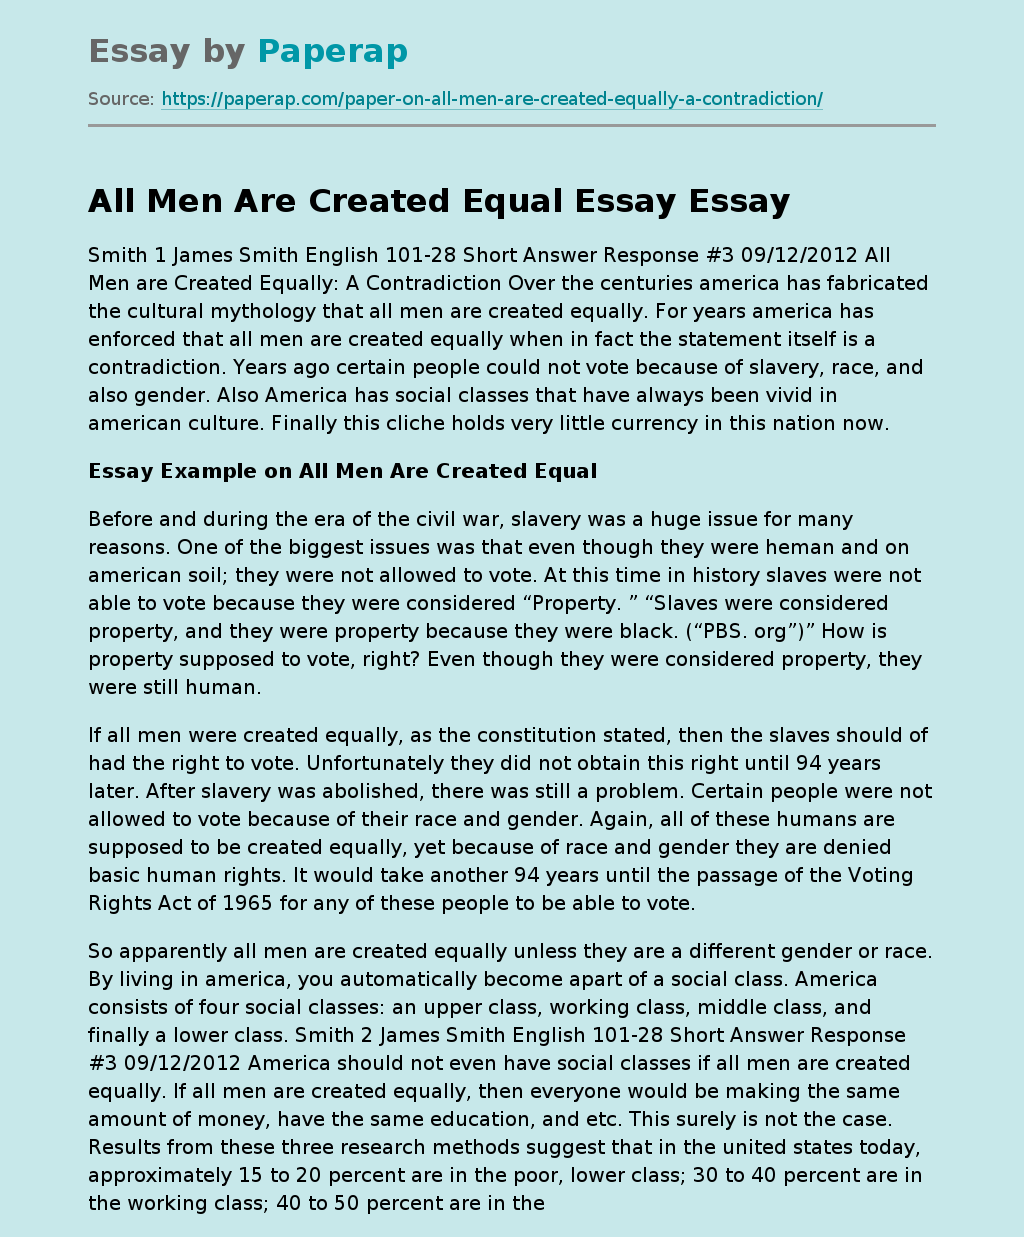 All Men Are Created Equal Essay